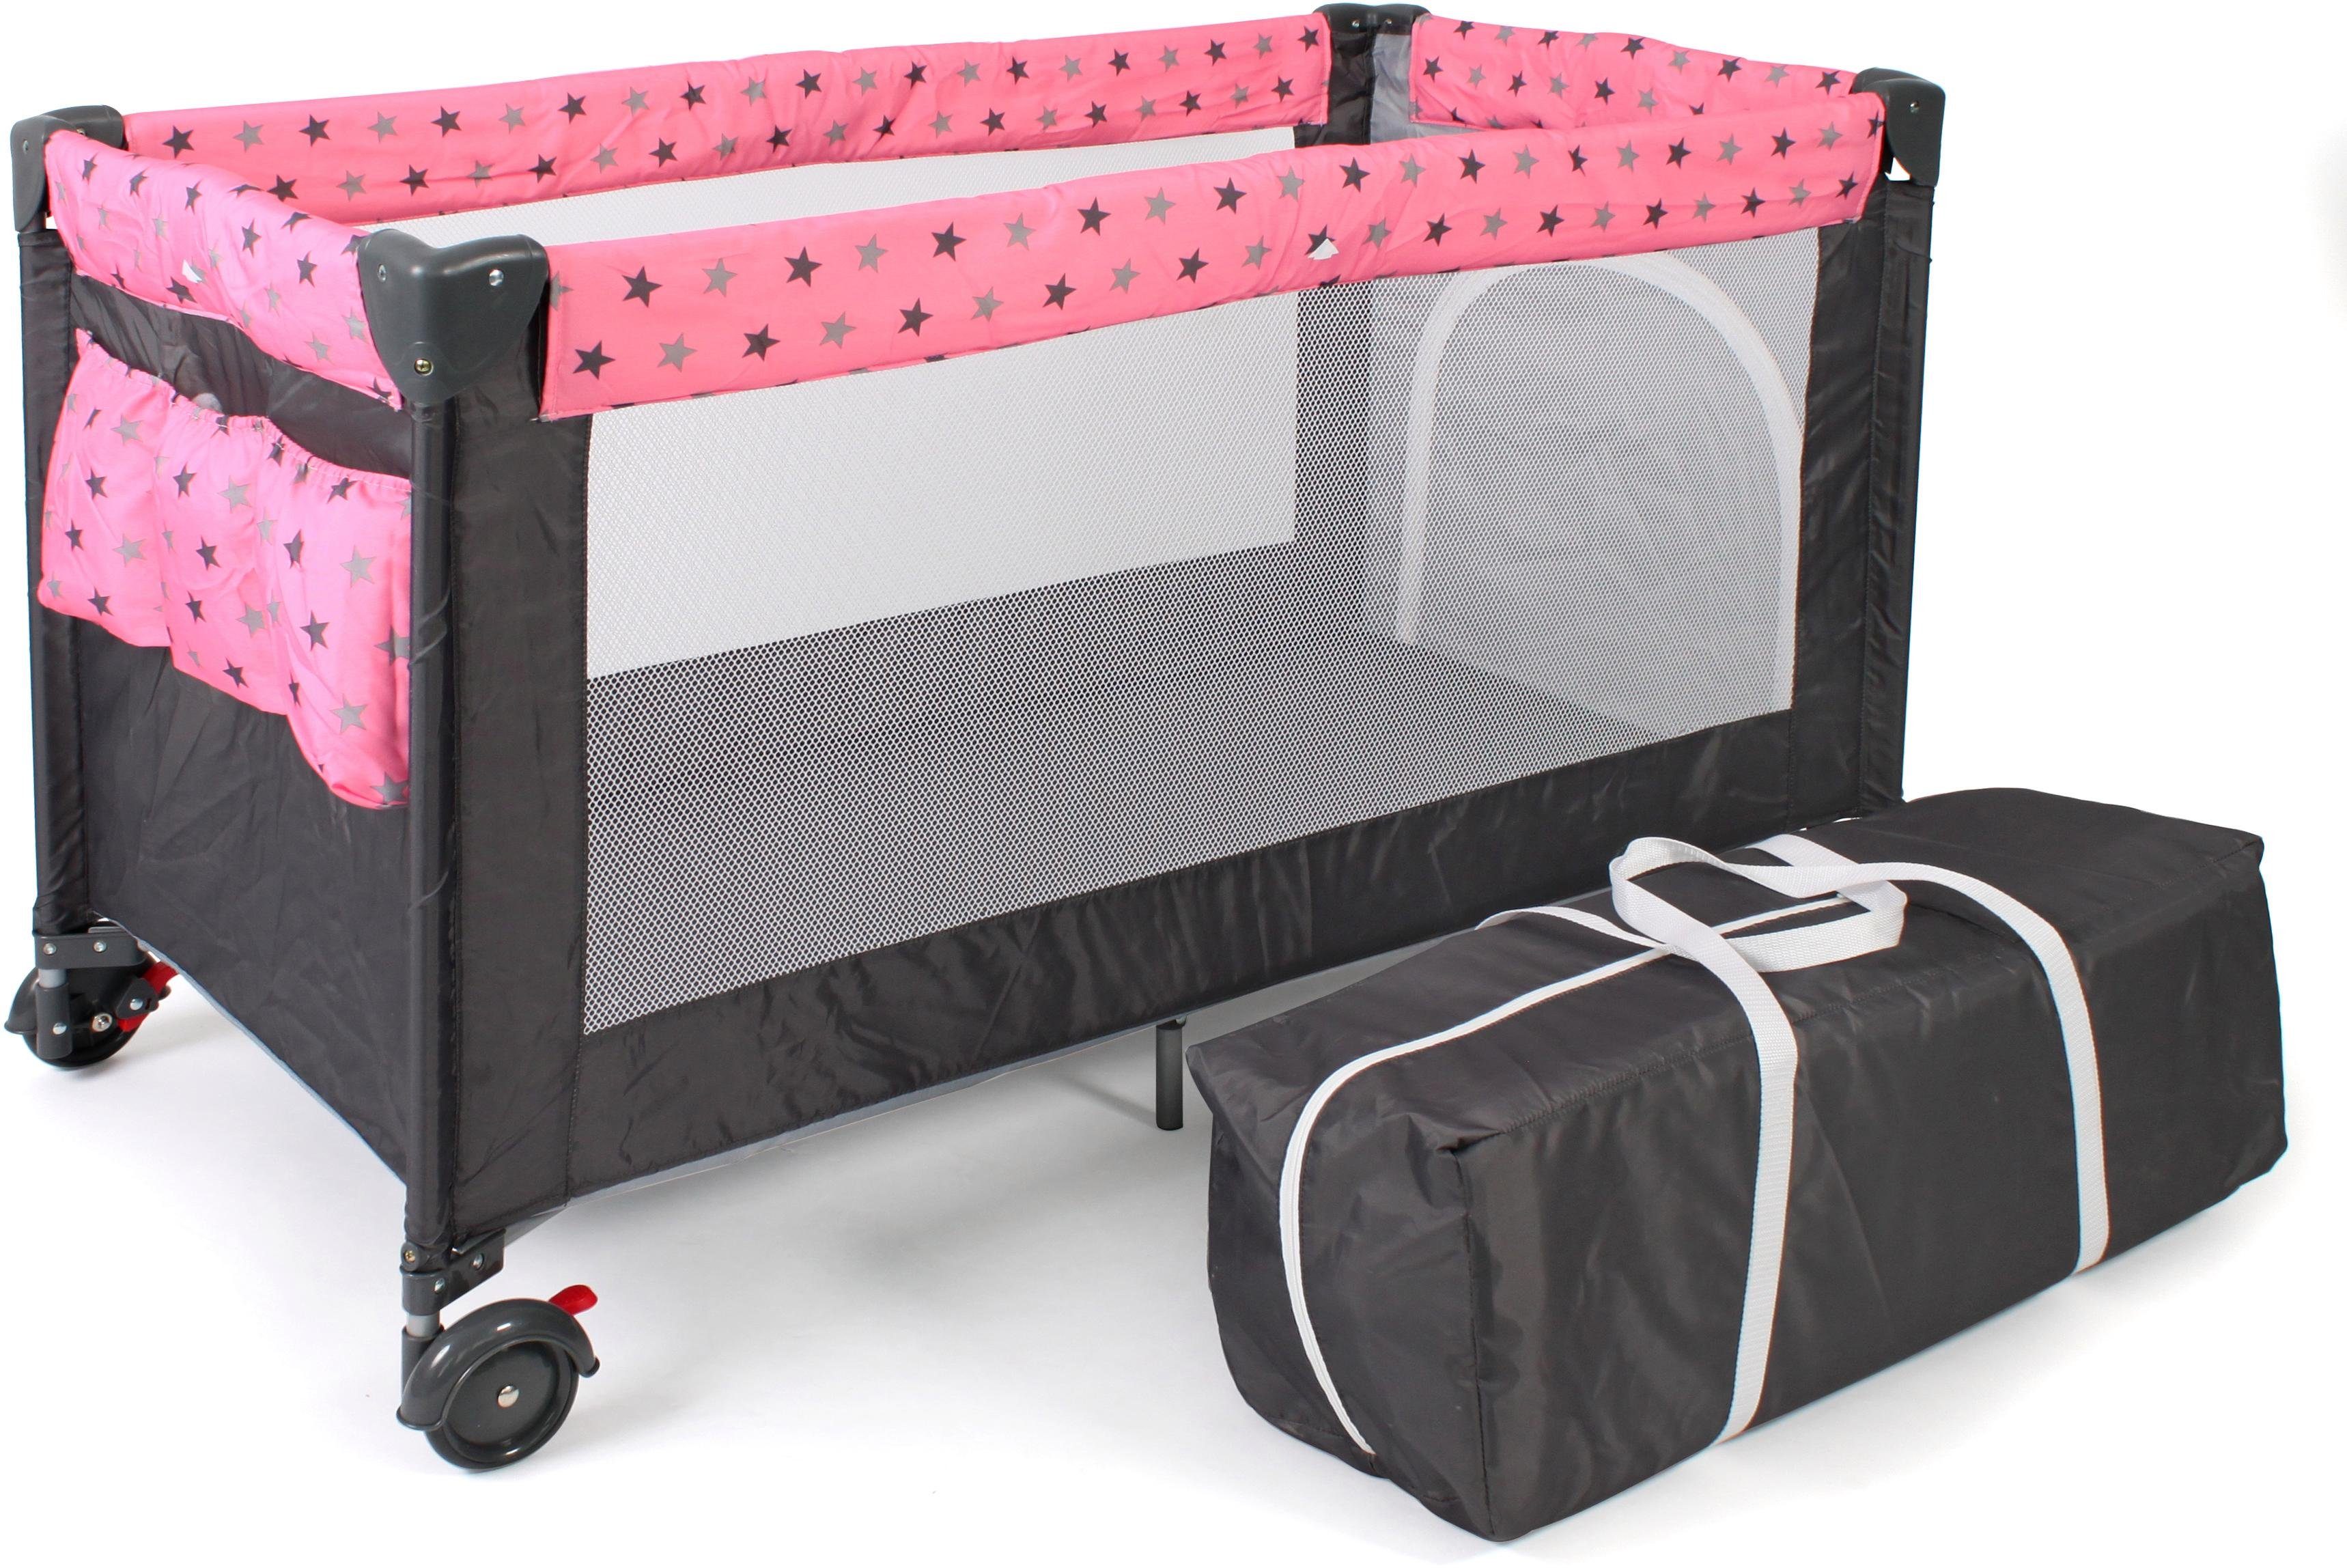 CHIC4BABY Baby-campingbed Luxe, sterretje grijs